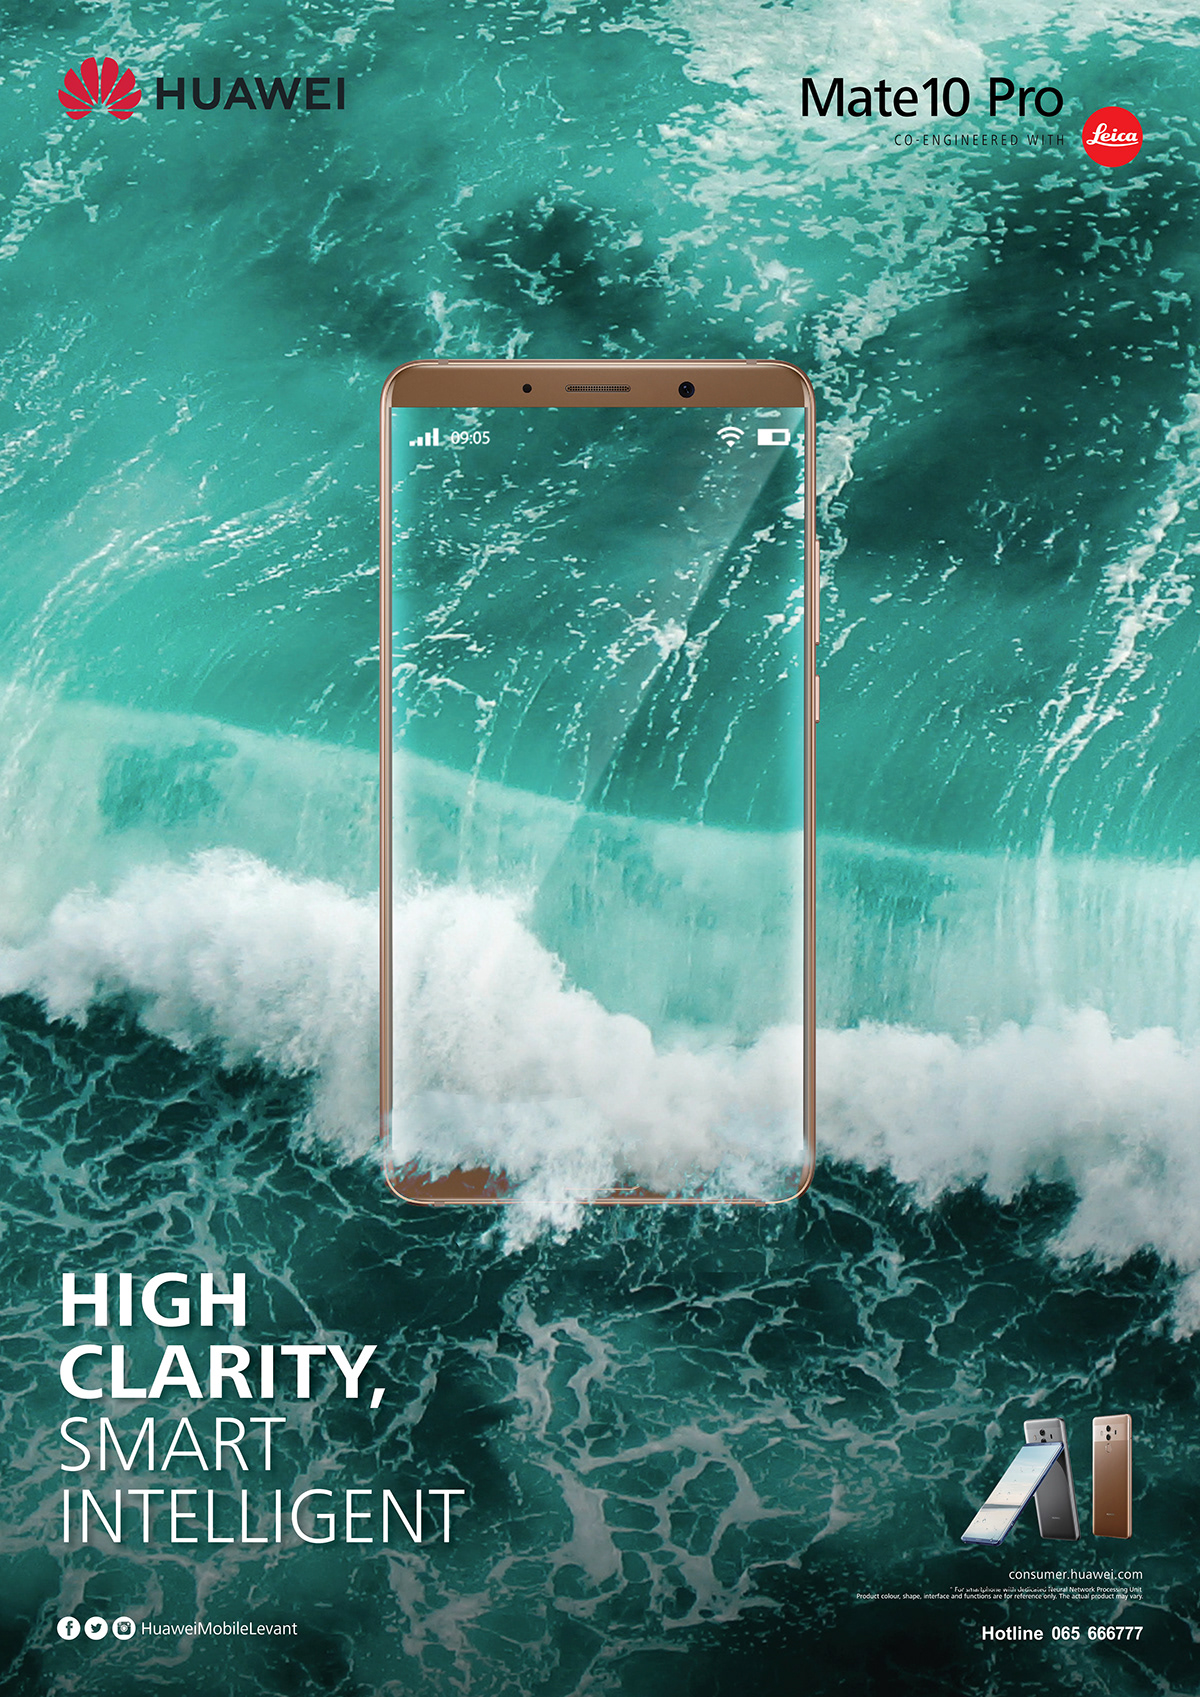 ad clarity huawei Mate10 Pro mobile poster screen sea smartphone